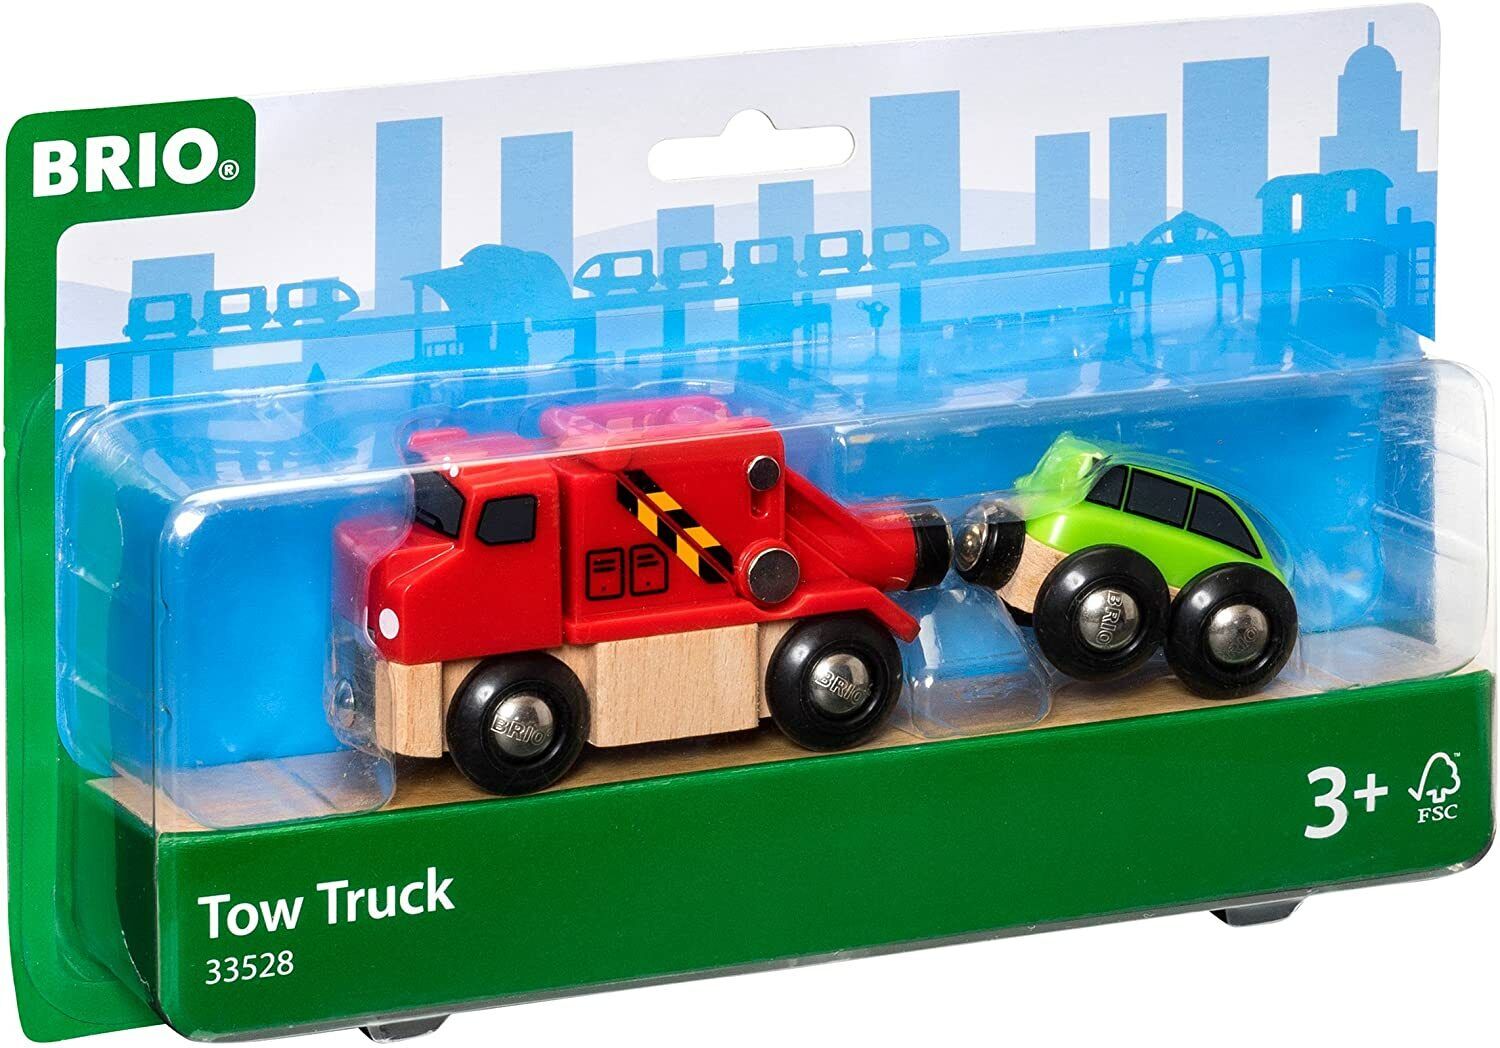 BRIO World Tow Truck 33528 - Brand New in Box - Free Shipping